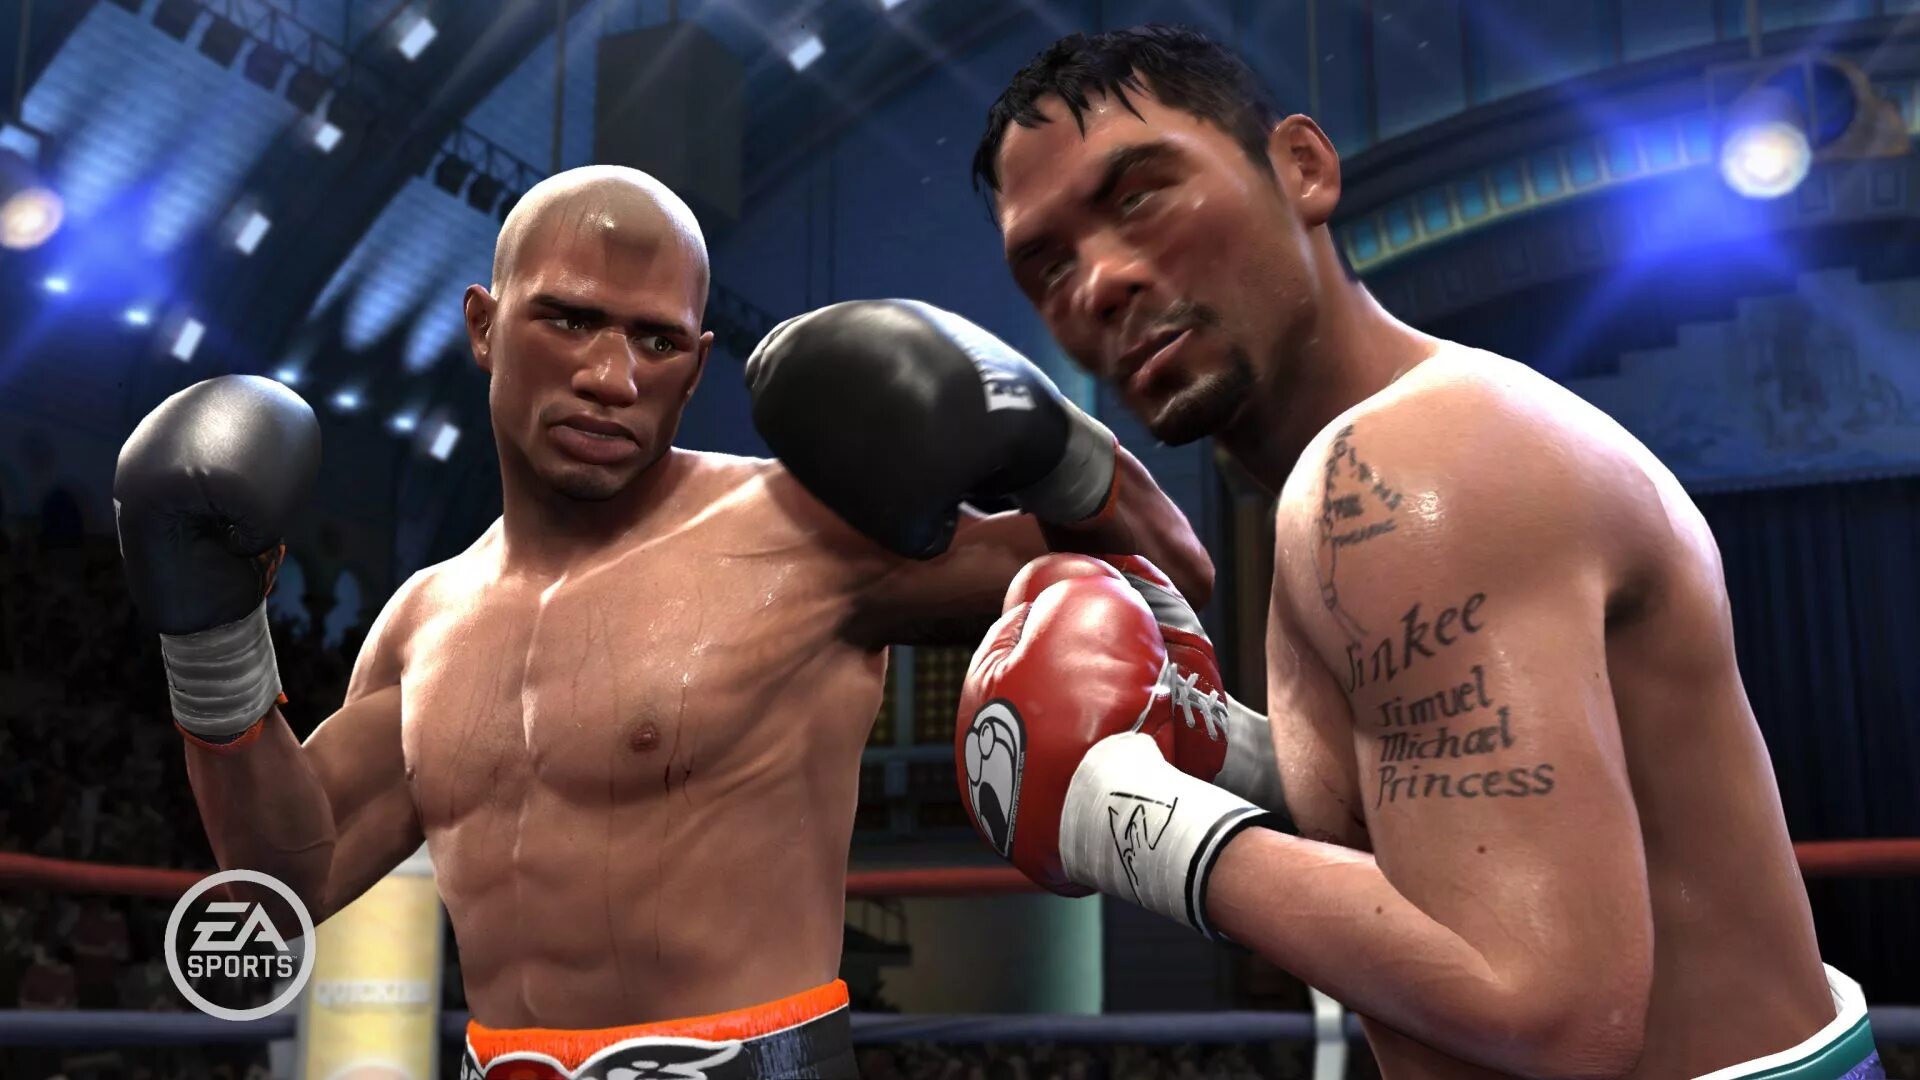 Untilited boxing game. Файт Найт раунд 4 на ПС 4. Файт Найт бокс на ПС 4. Real Boxing 5. Fight Night Champion ps4.